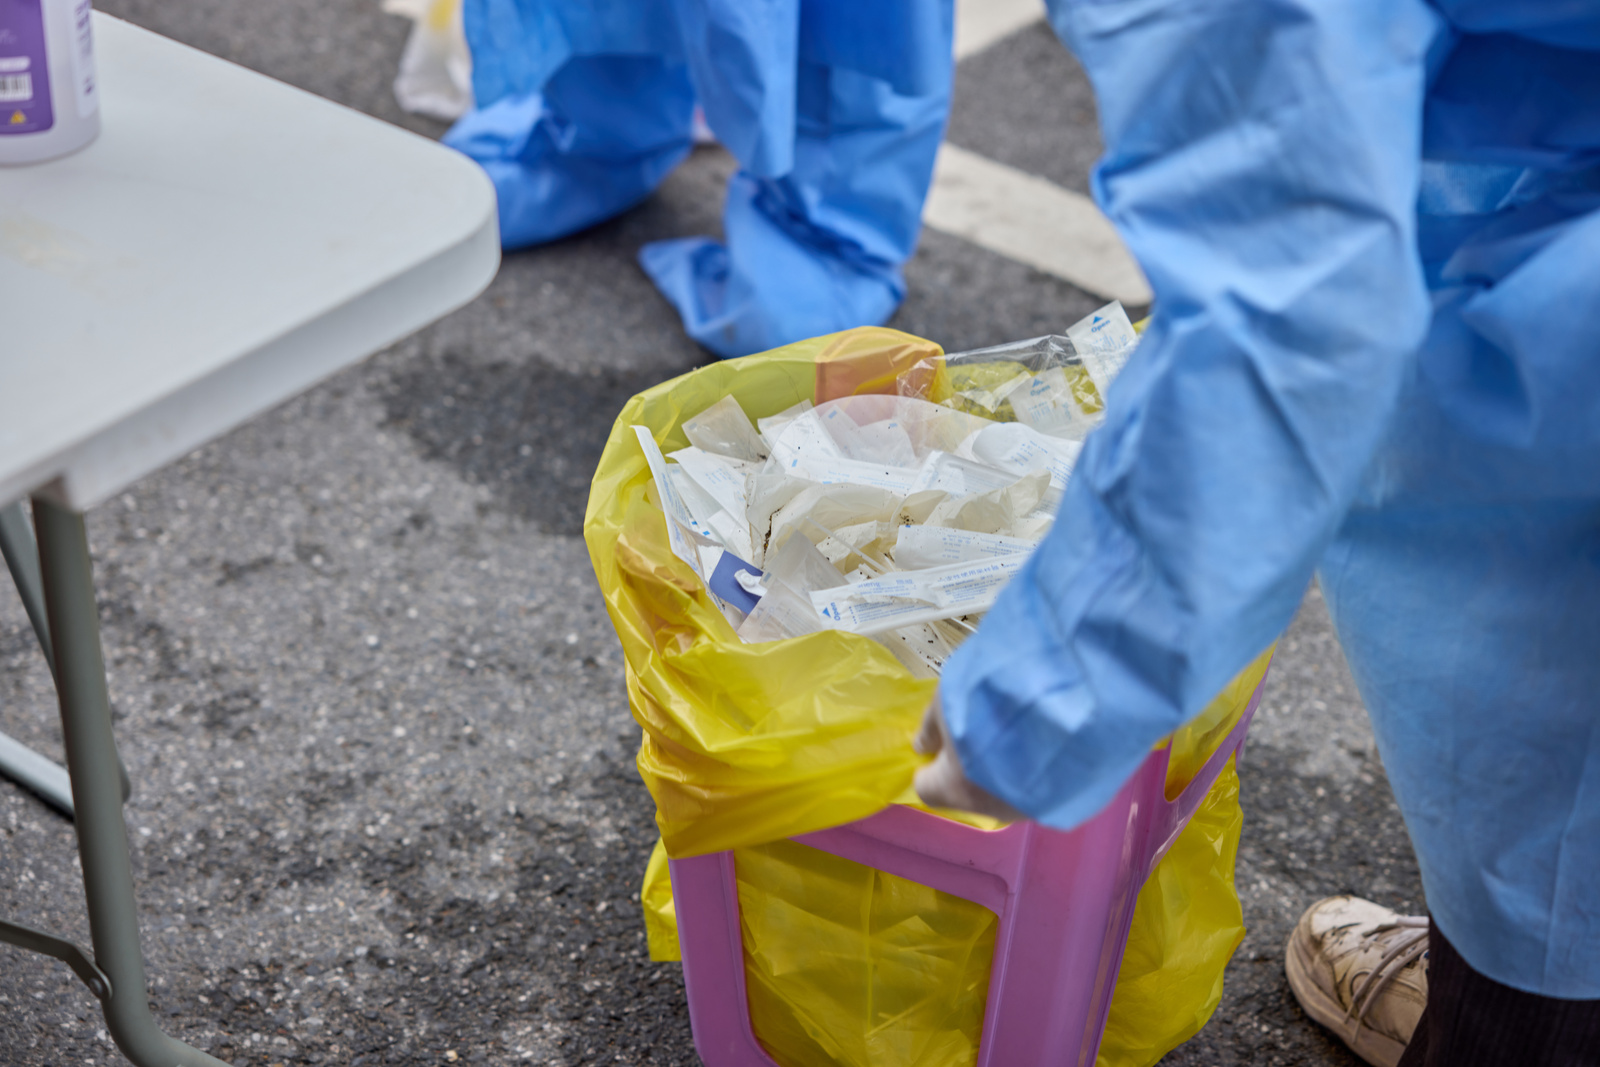 Medical worker managing infectious waste.